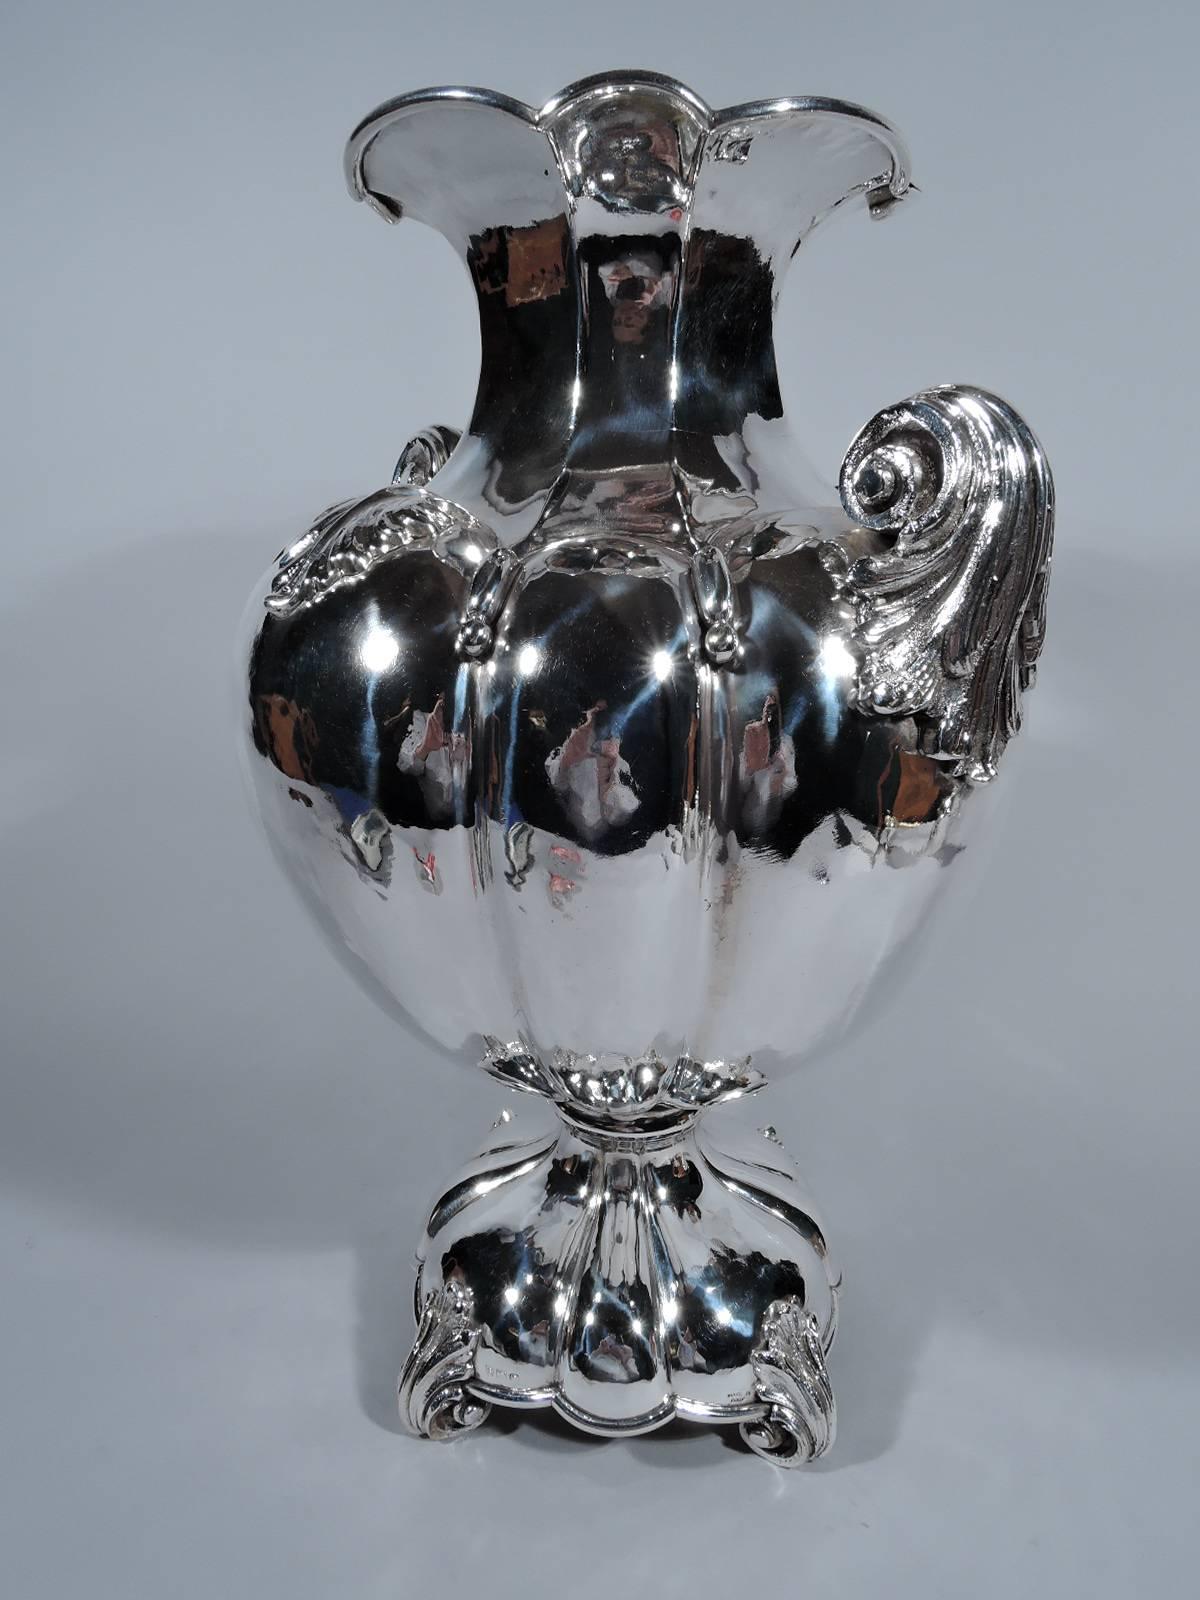 Large hand-hammered silver amphora vase. Made by Corradini in Bologna. Traditional form with alternating wide and narrow lobes on body and foot. Faceted neck with scalloped rim. Leaf-mounted volute scroll side handles and corner supports. Bold